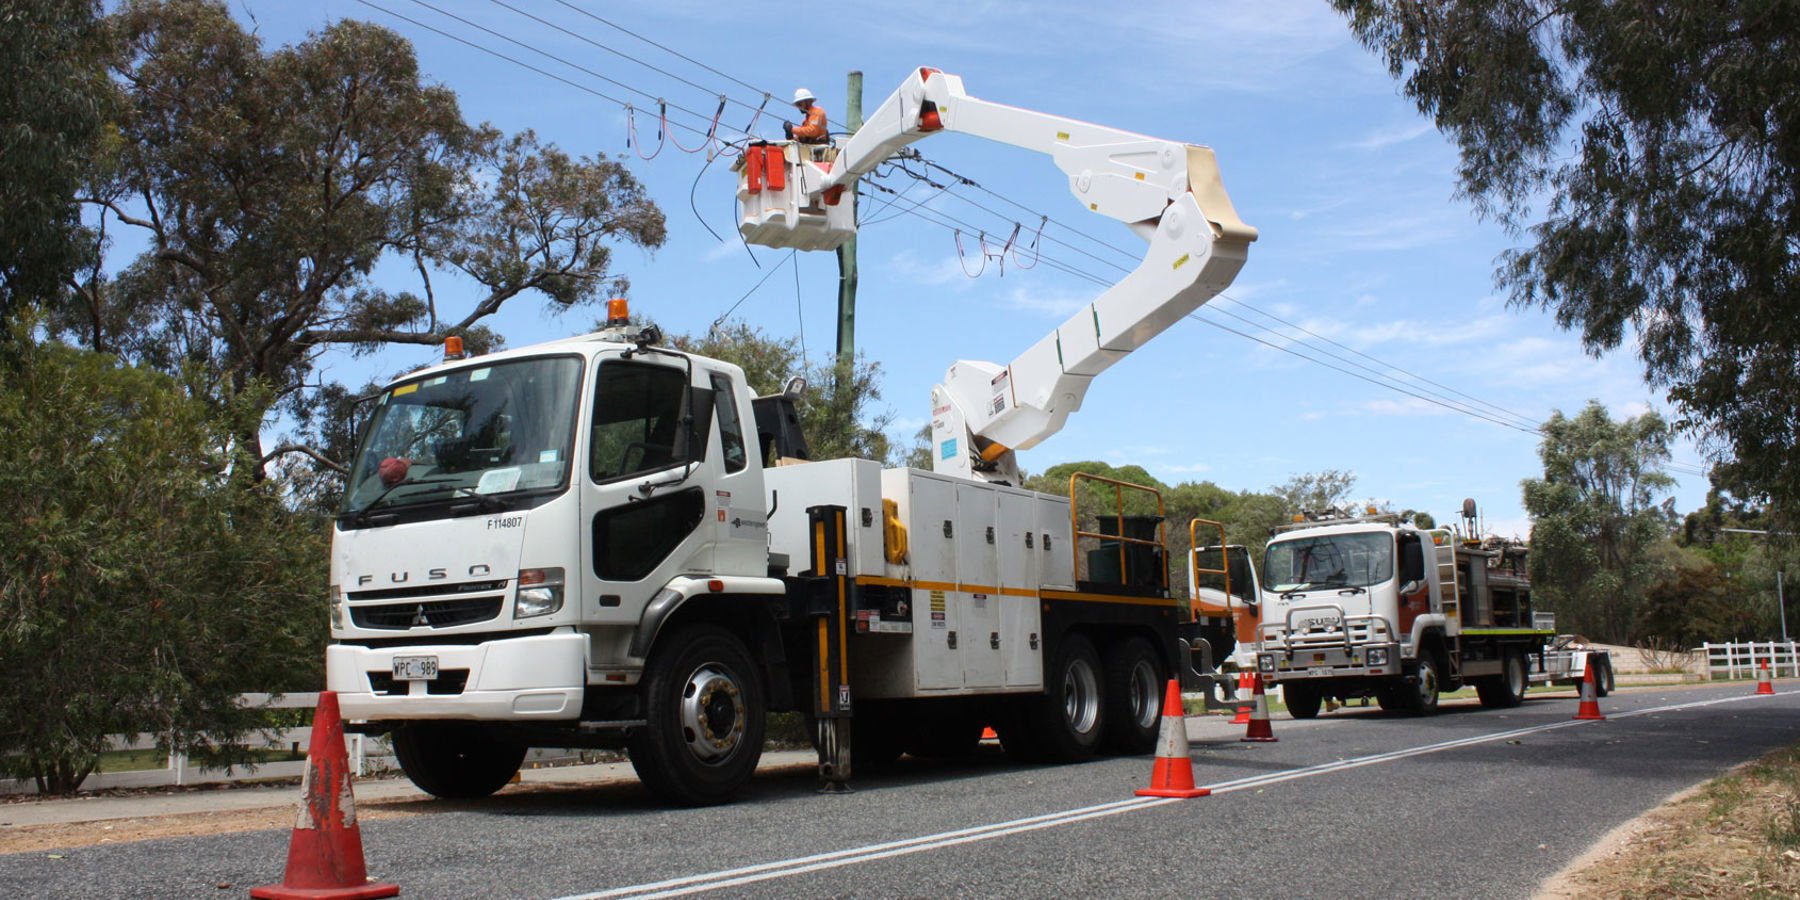 Western Power crew in a cherry picker working on the overhead power lines